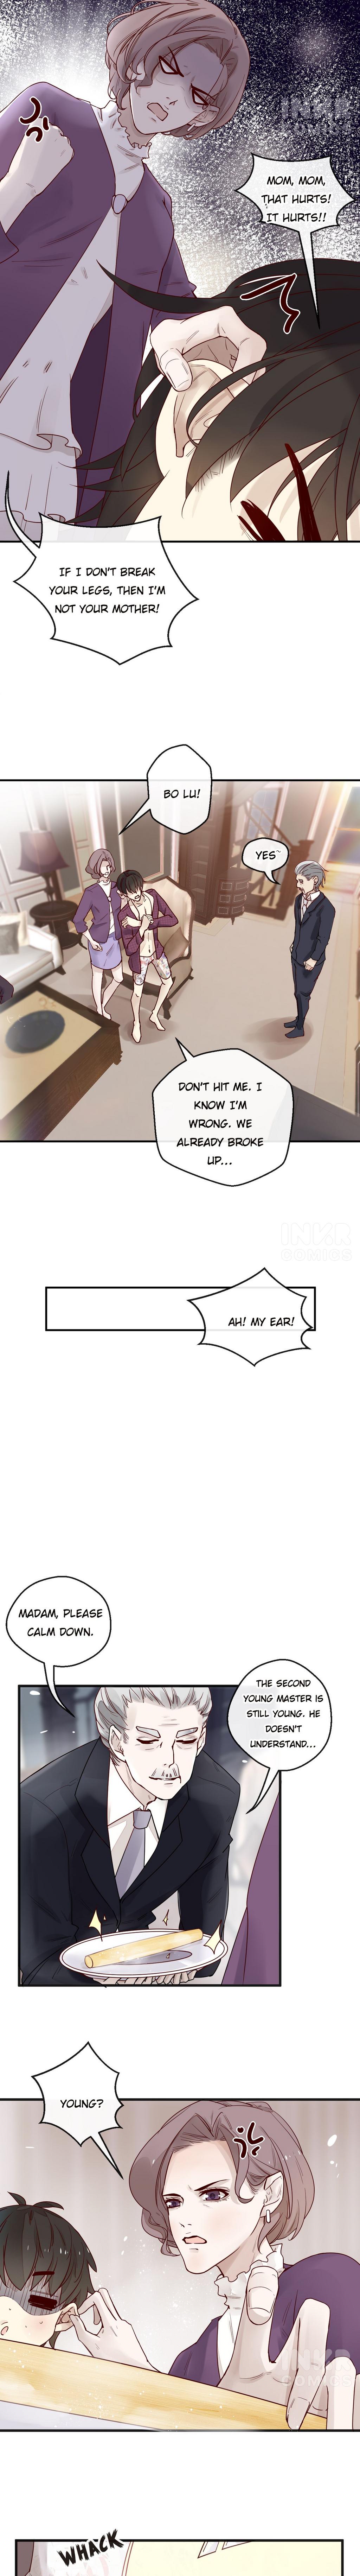 Accidental Love - Page 3